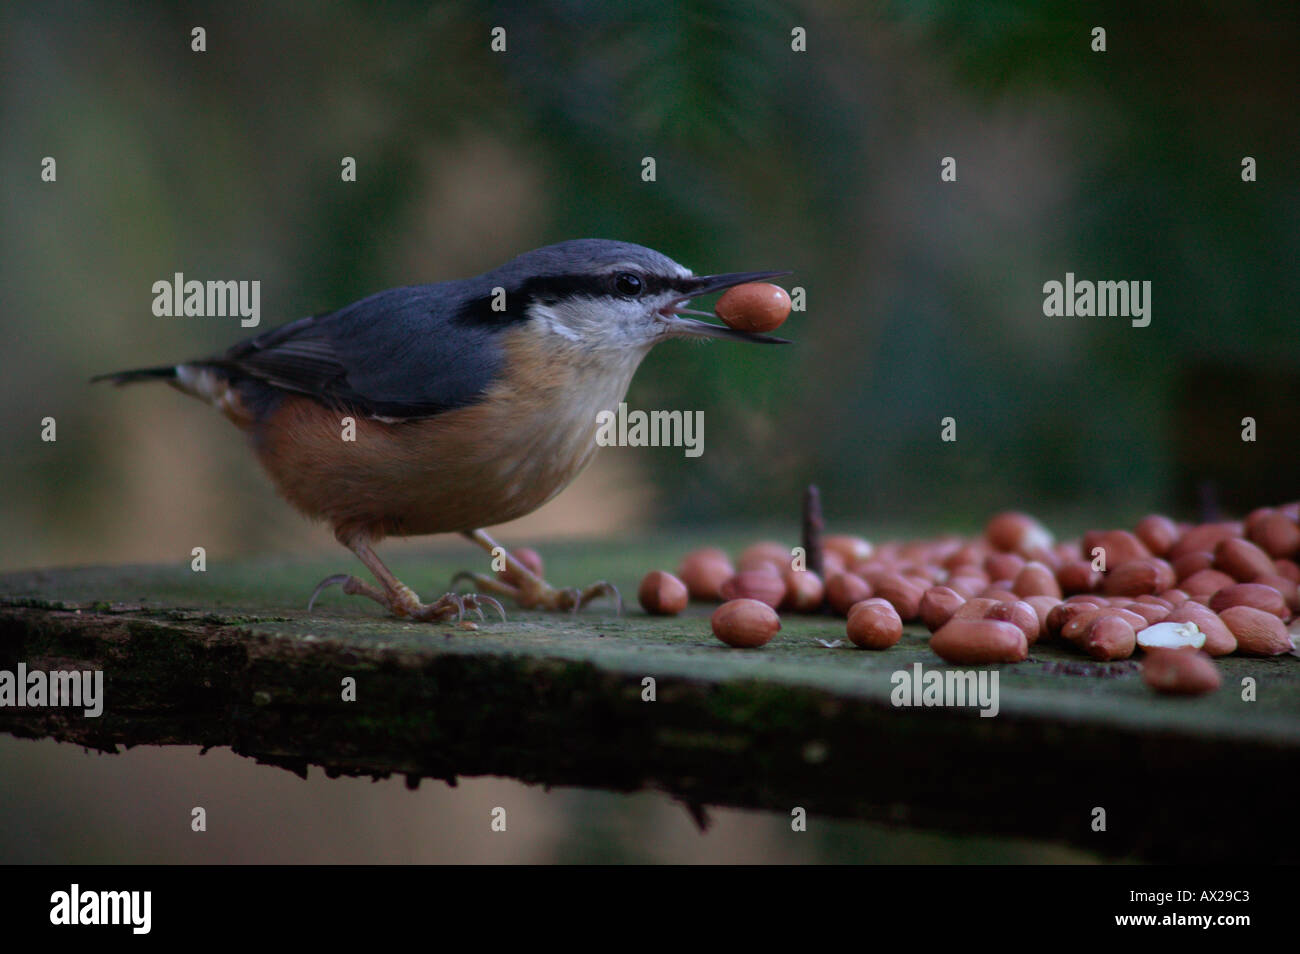 Nuthatch on bird table with peanut in mouth Stock Photo